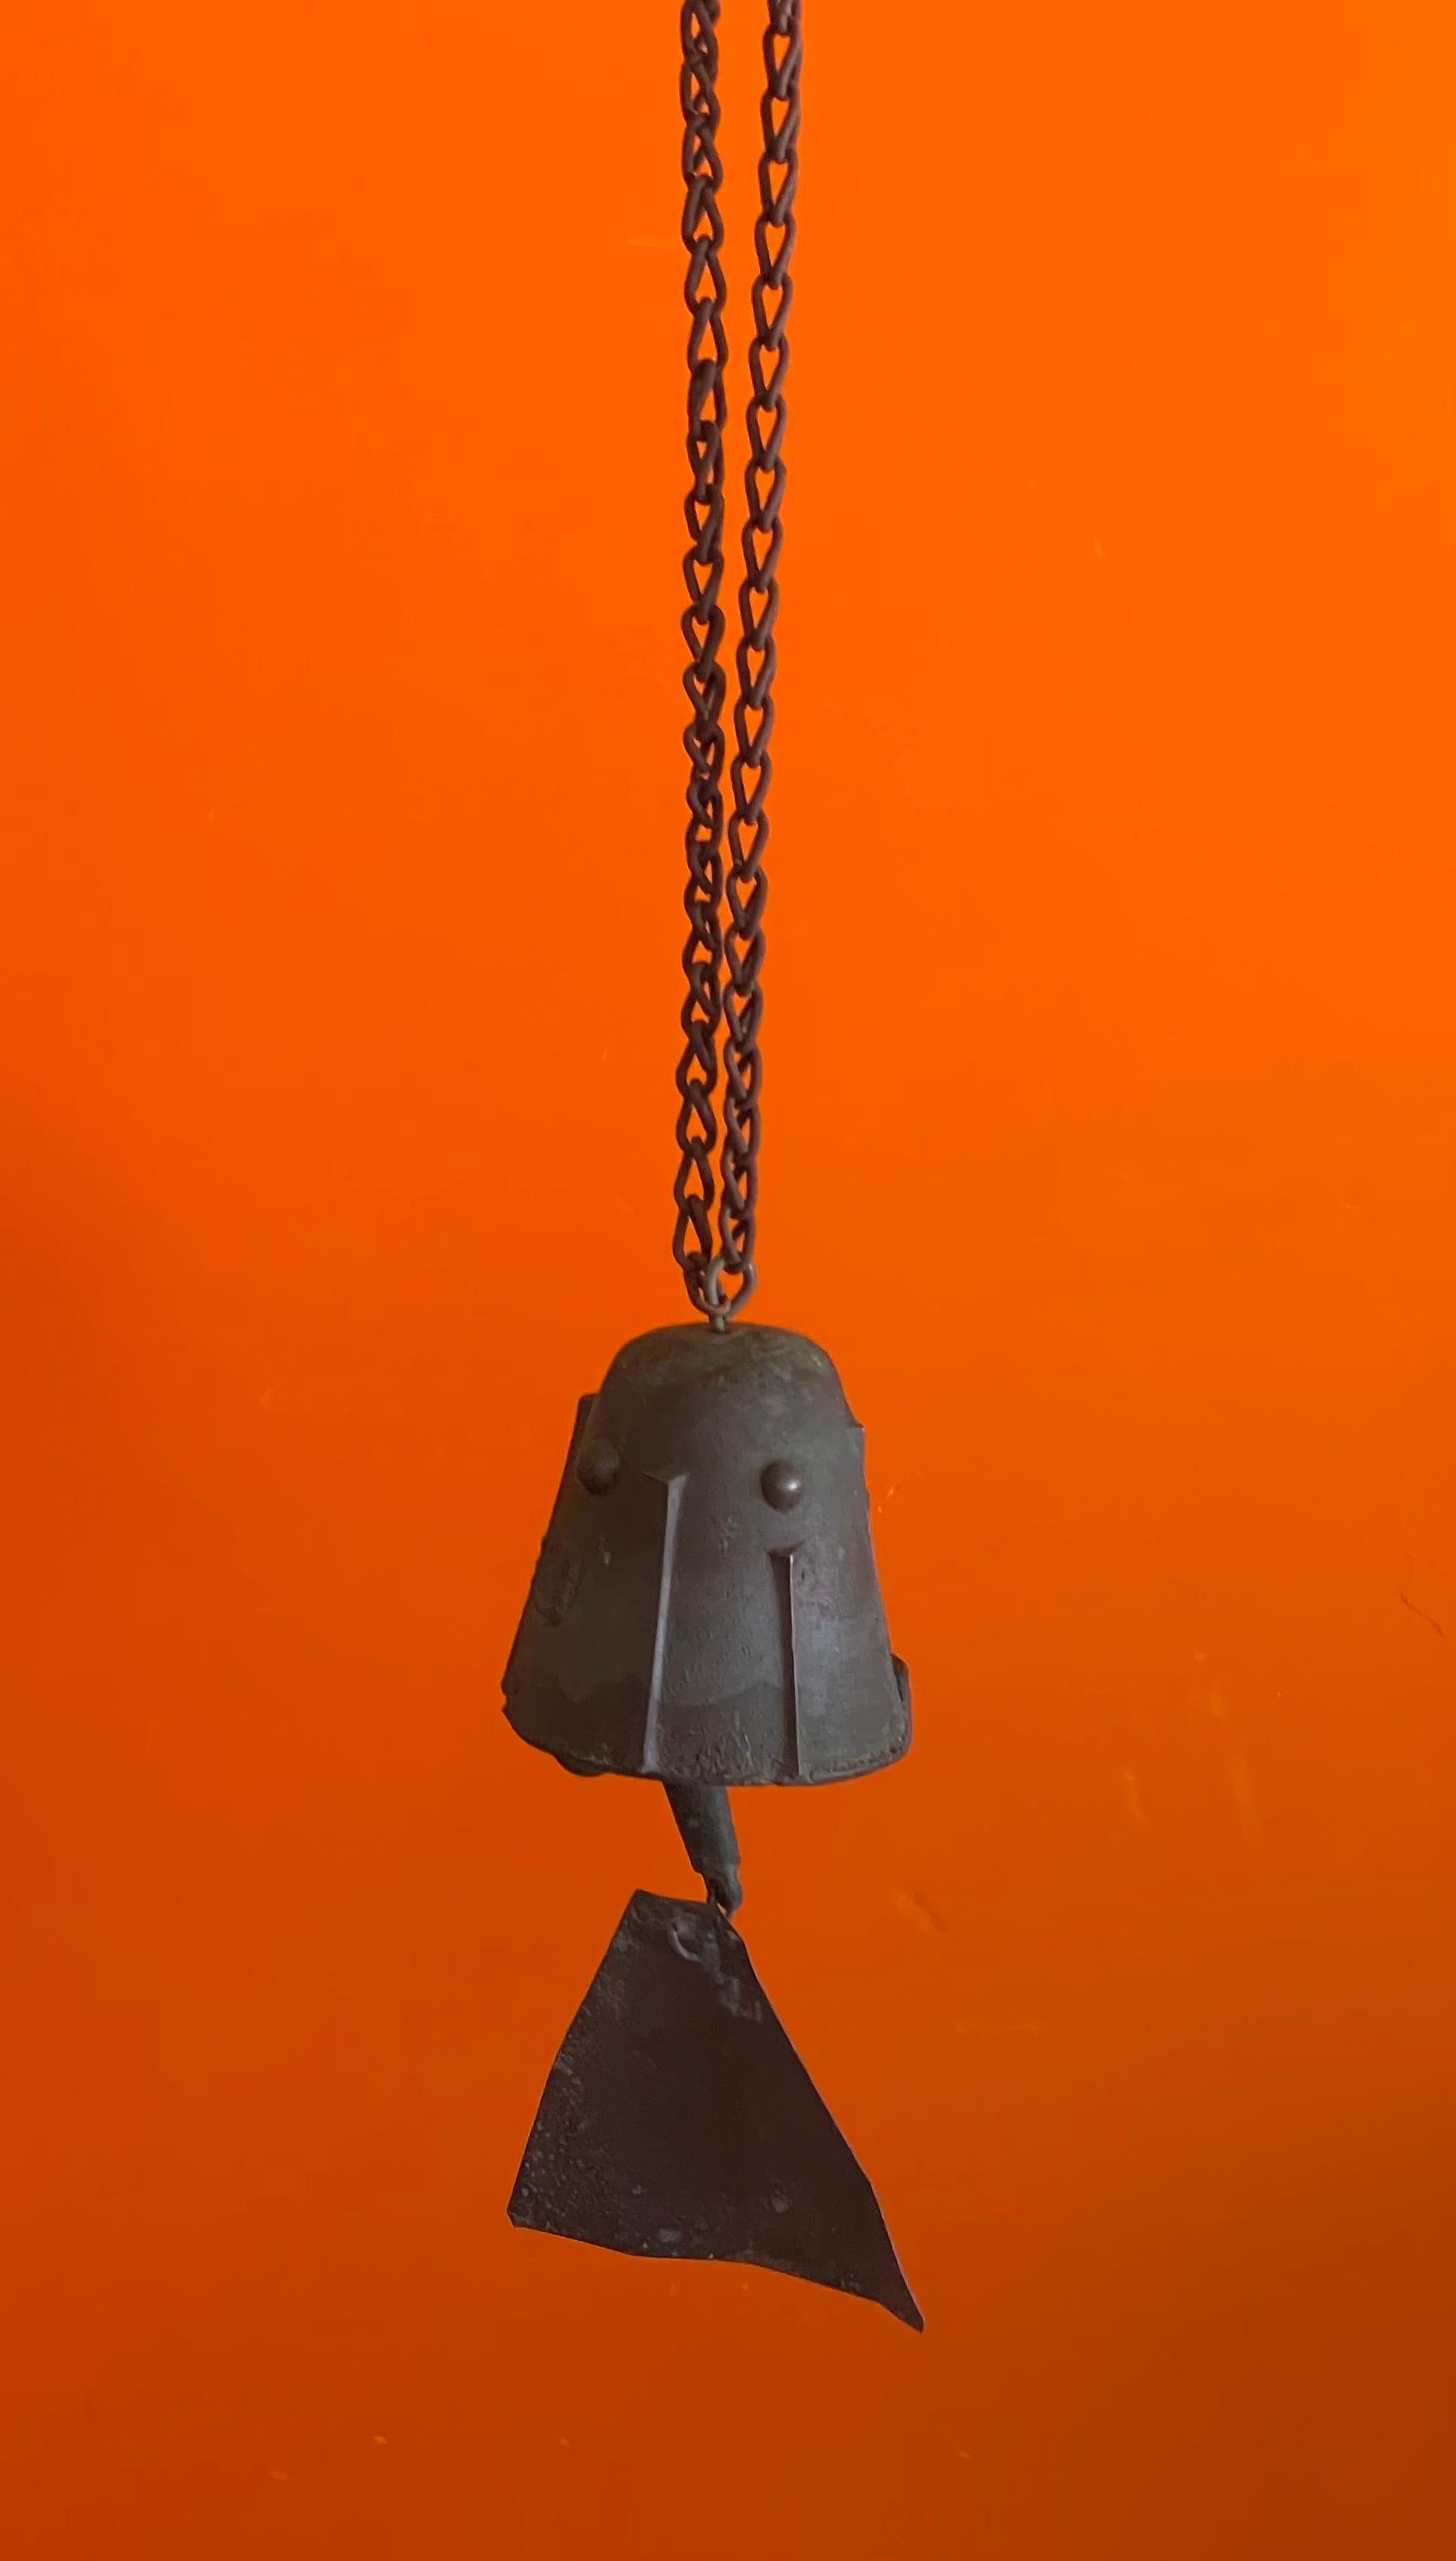 Small Bronze Wind Chime / Bell by Paolo Soleri for Cosanti 3